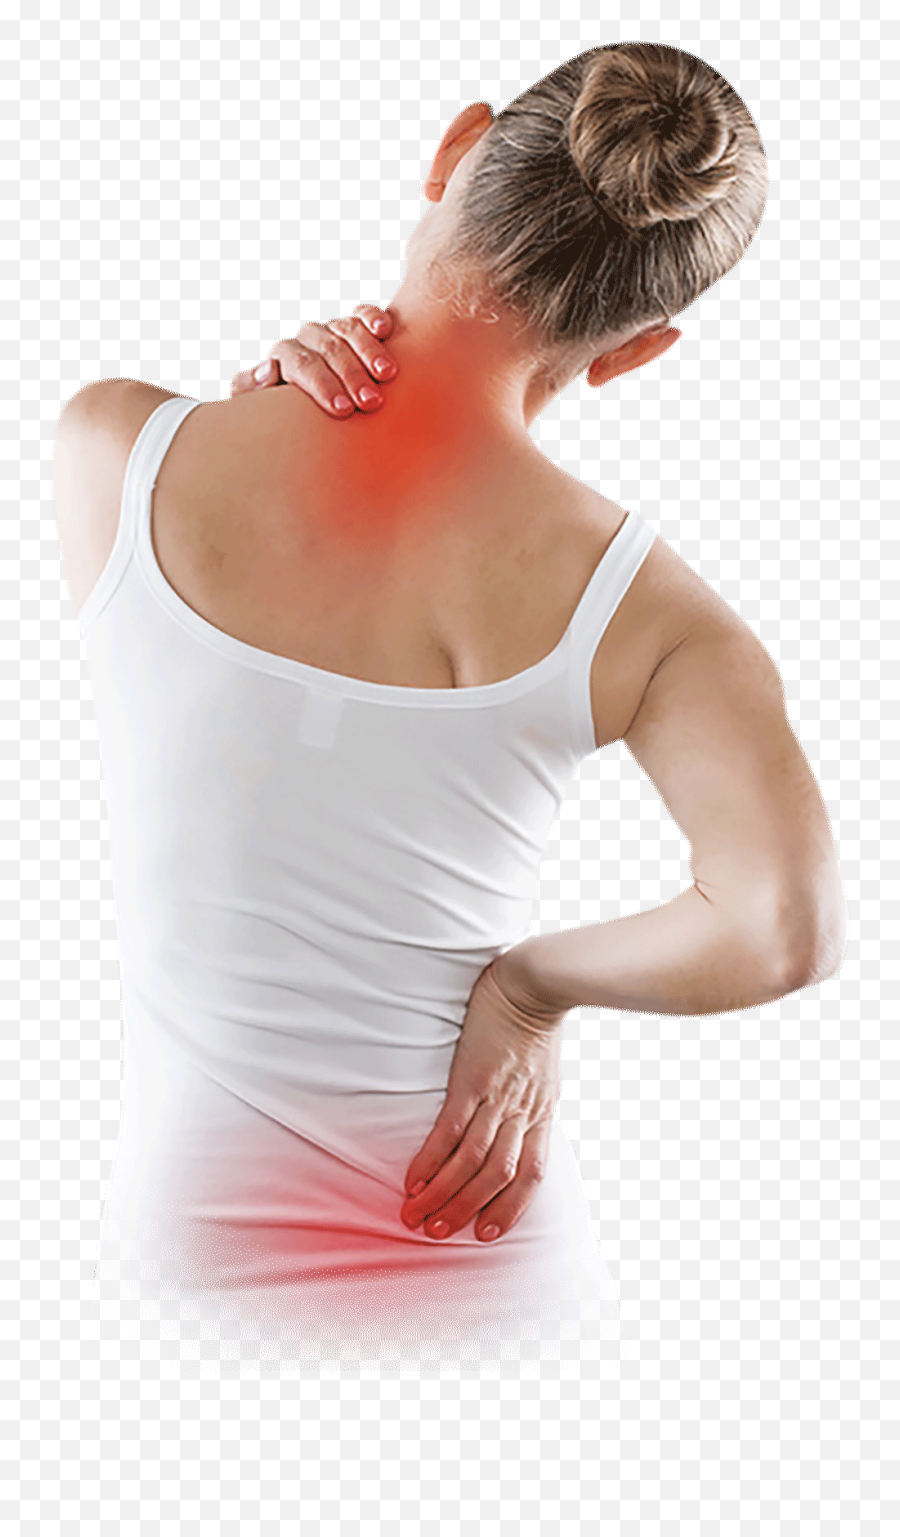 Rausch Physical Therapy U0026 Sports Performance Sports Injury - Your Neck Or Back Pain Increasing Emoji,Hayward On Emotions Of Ankle Injury